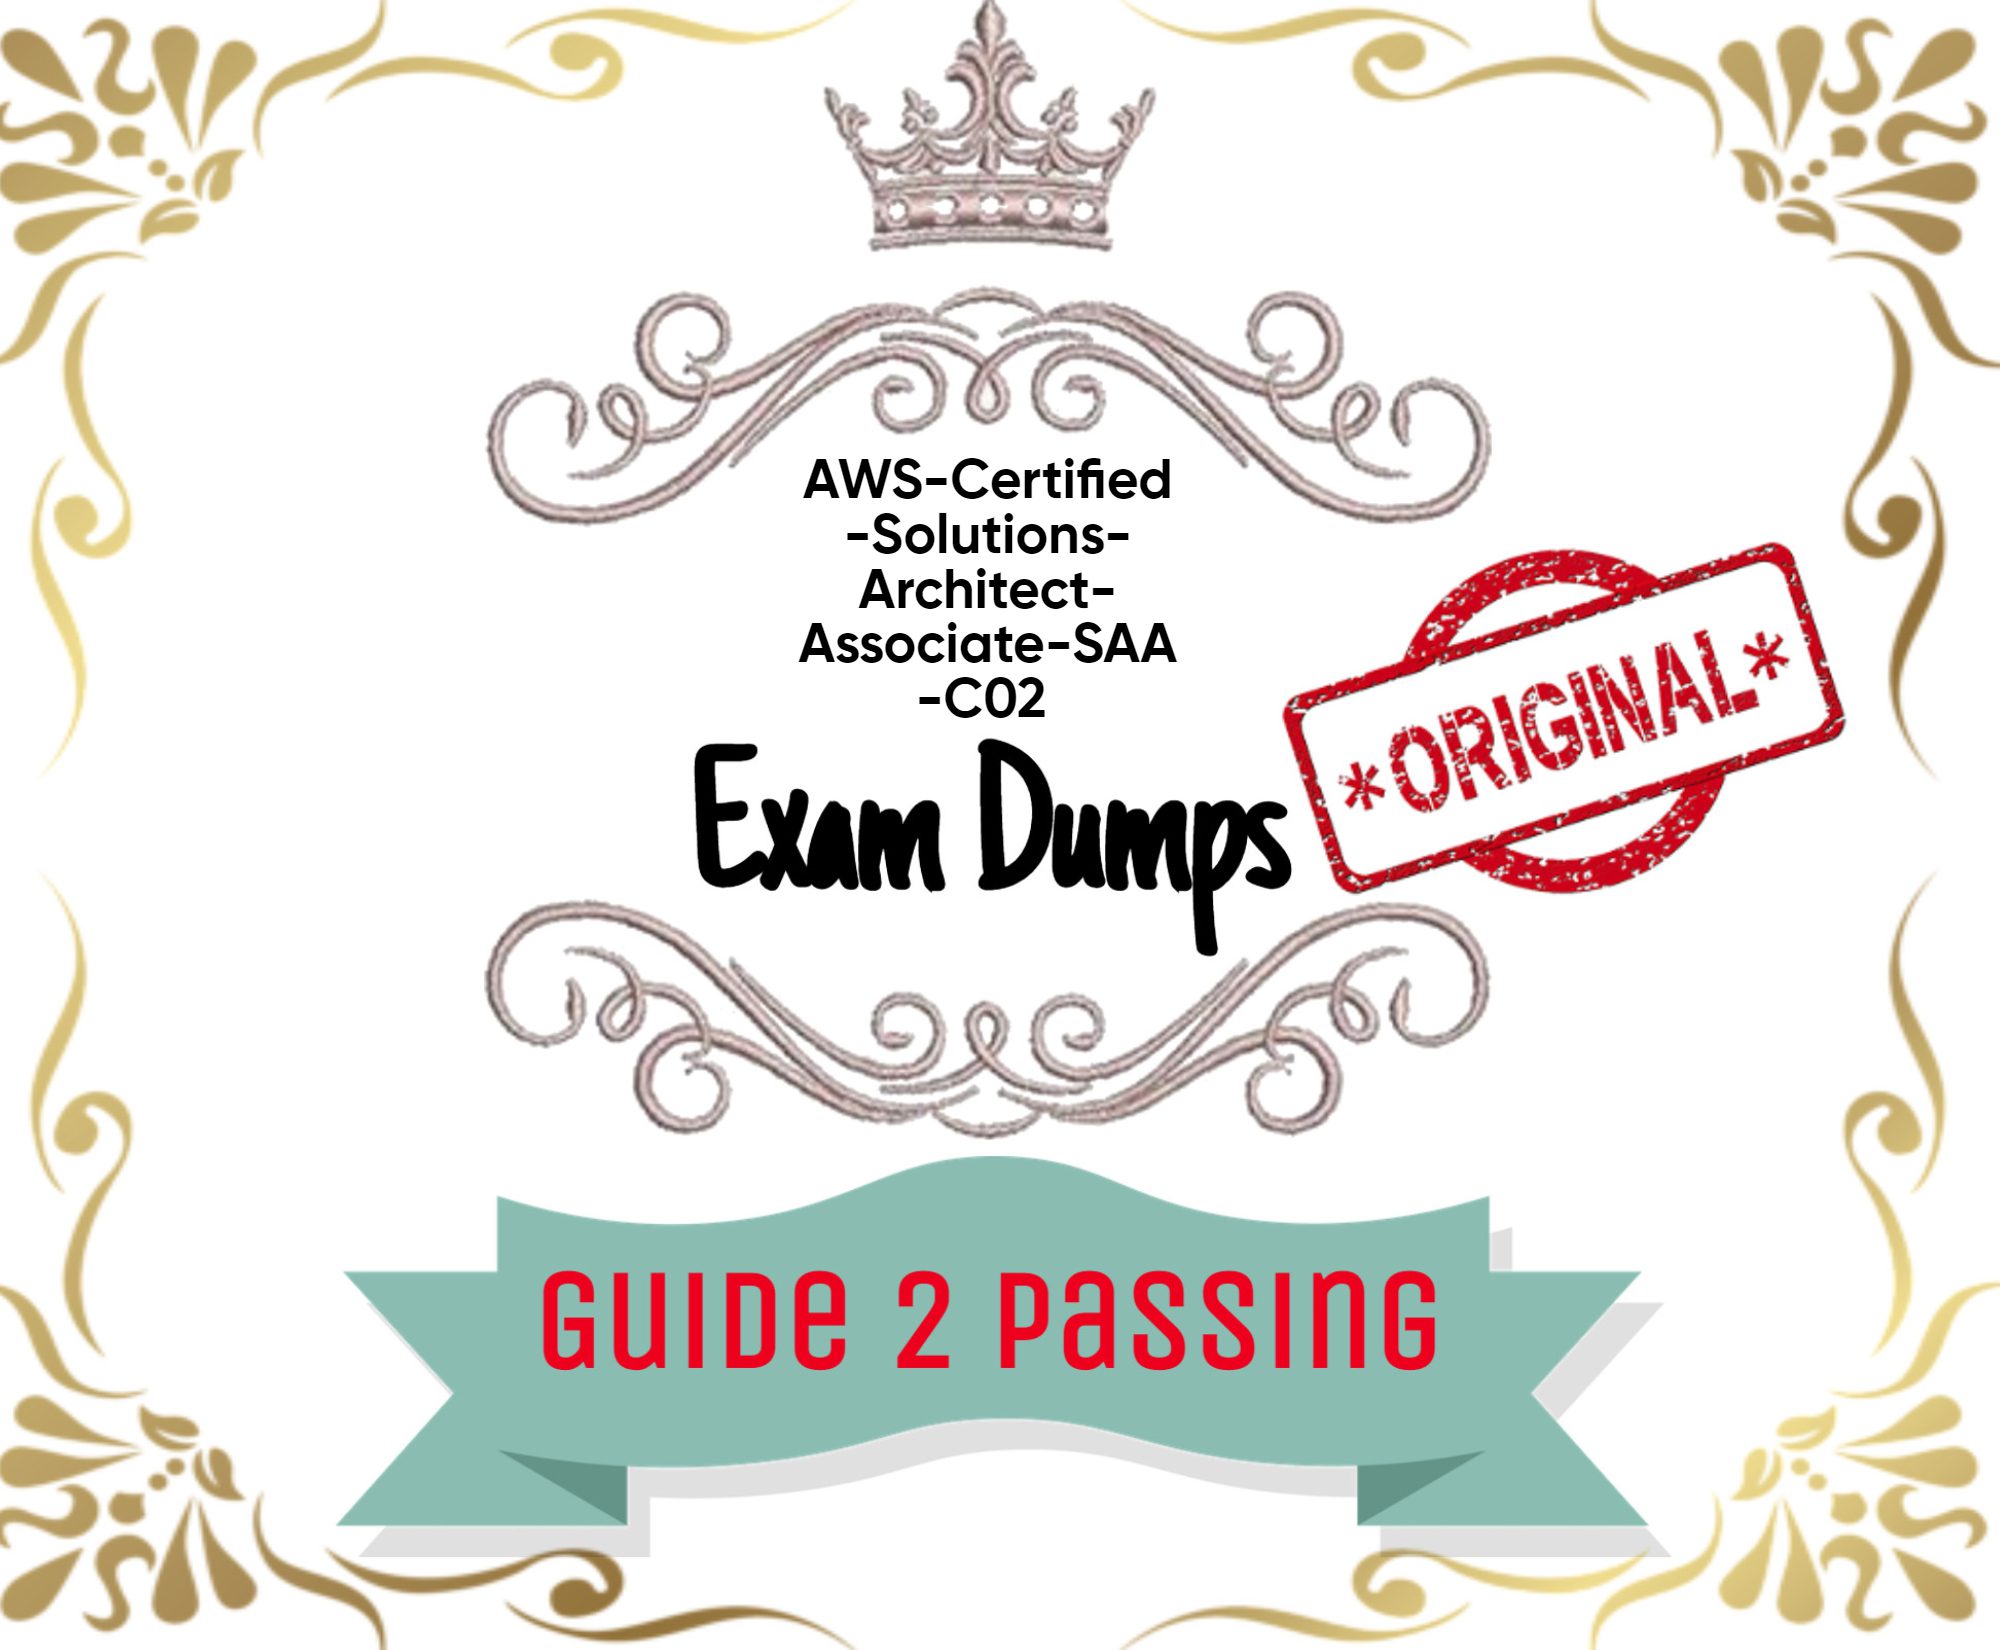 Pass Your Amazon AWS AWS-Certified-Solutions-Architect-Associate-SAA-C02 Exam Dumps From Guide 2 Passing